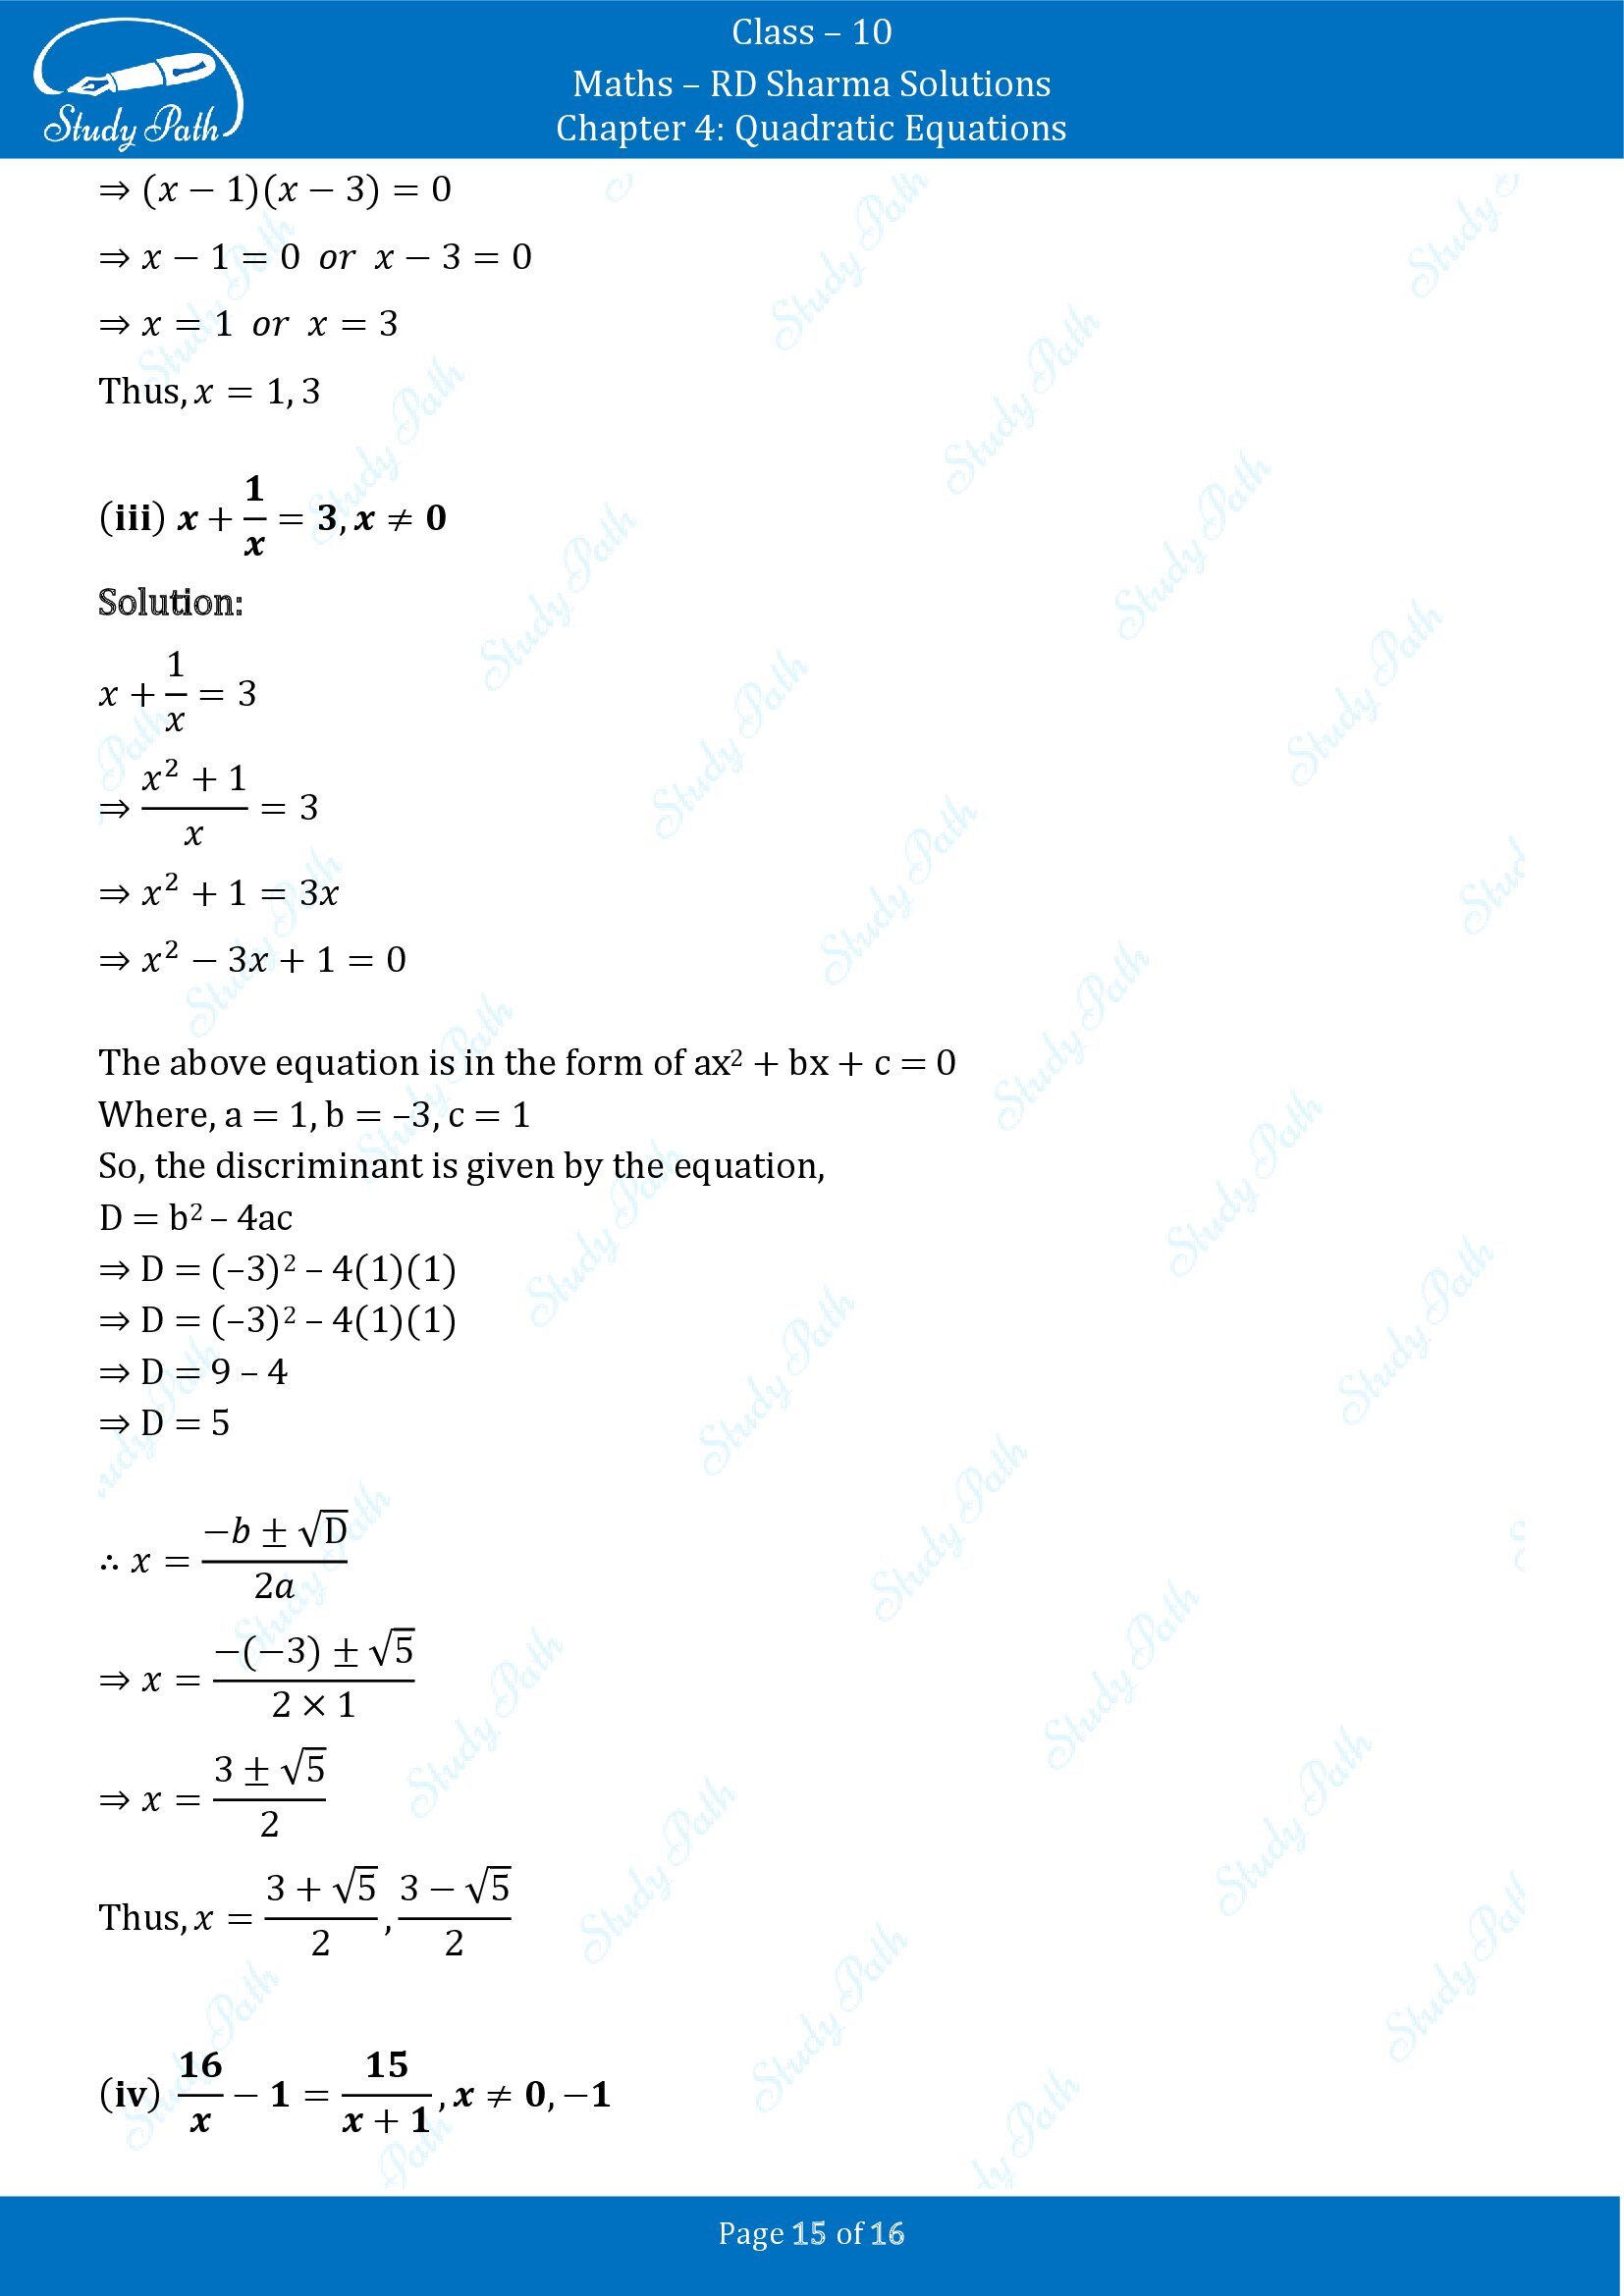 RD Sharma Solutions Class 10 Chapter 4 Quadratic Equations Exercise 4.5 00015